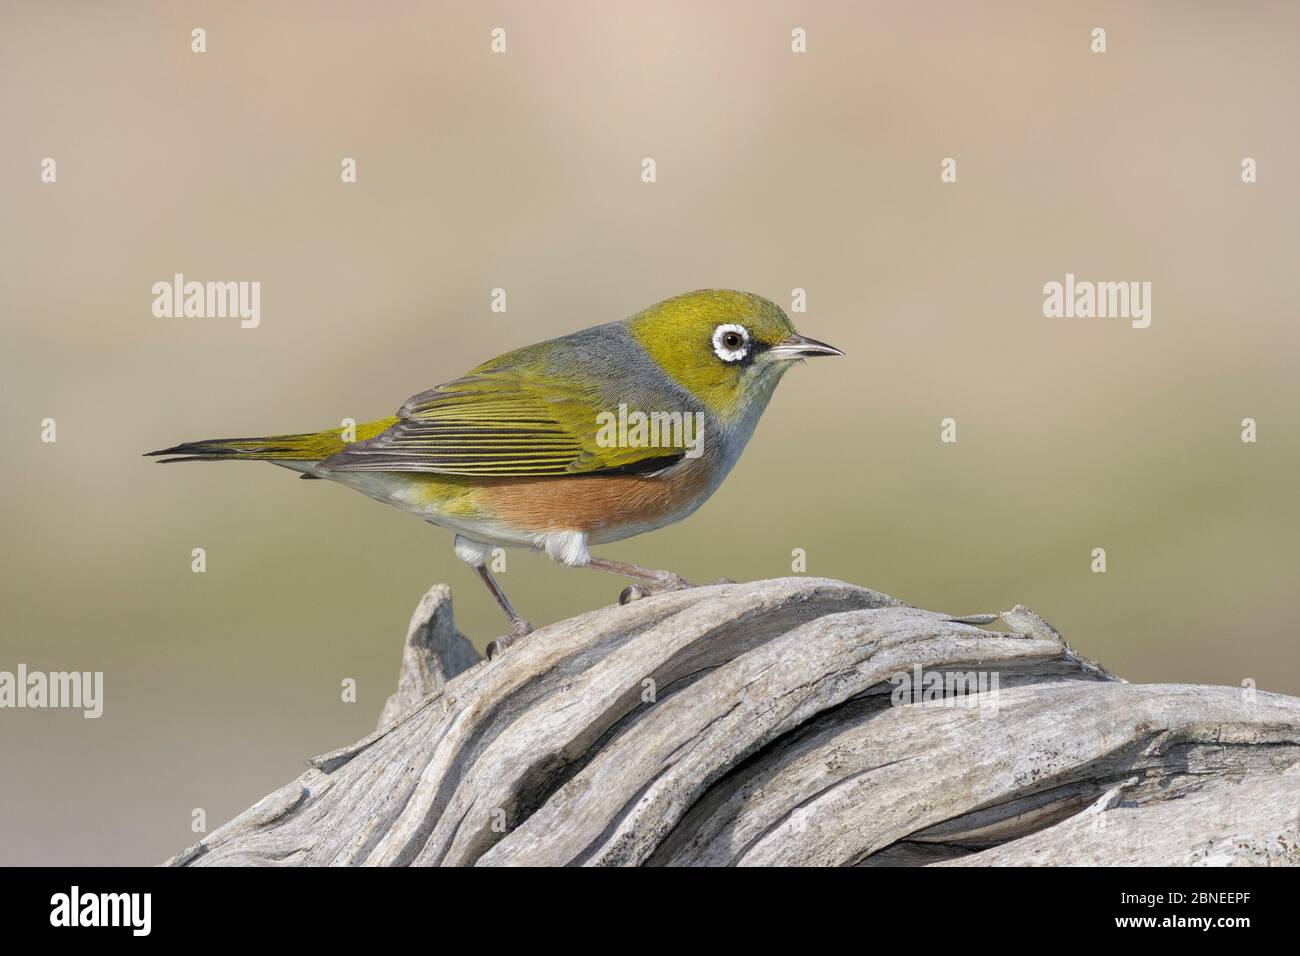 Silvereye or wax-eye (Zosterops lateralis) perched on driftwood. Birdlings Flat, Canterbury, New Zealand. August. Stock Photo